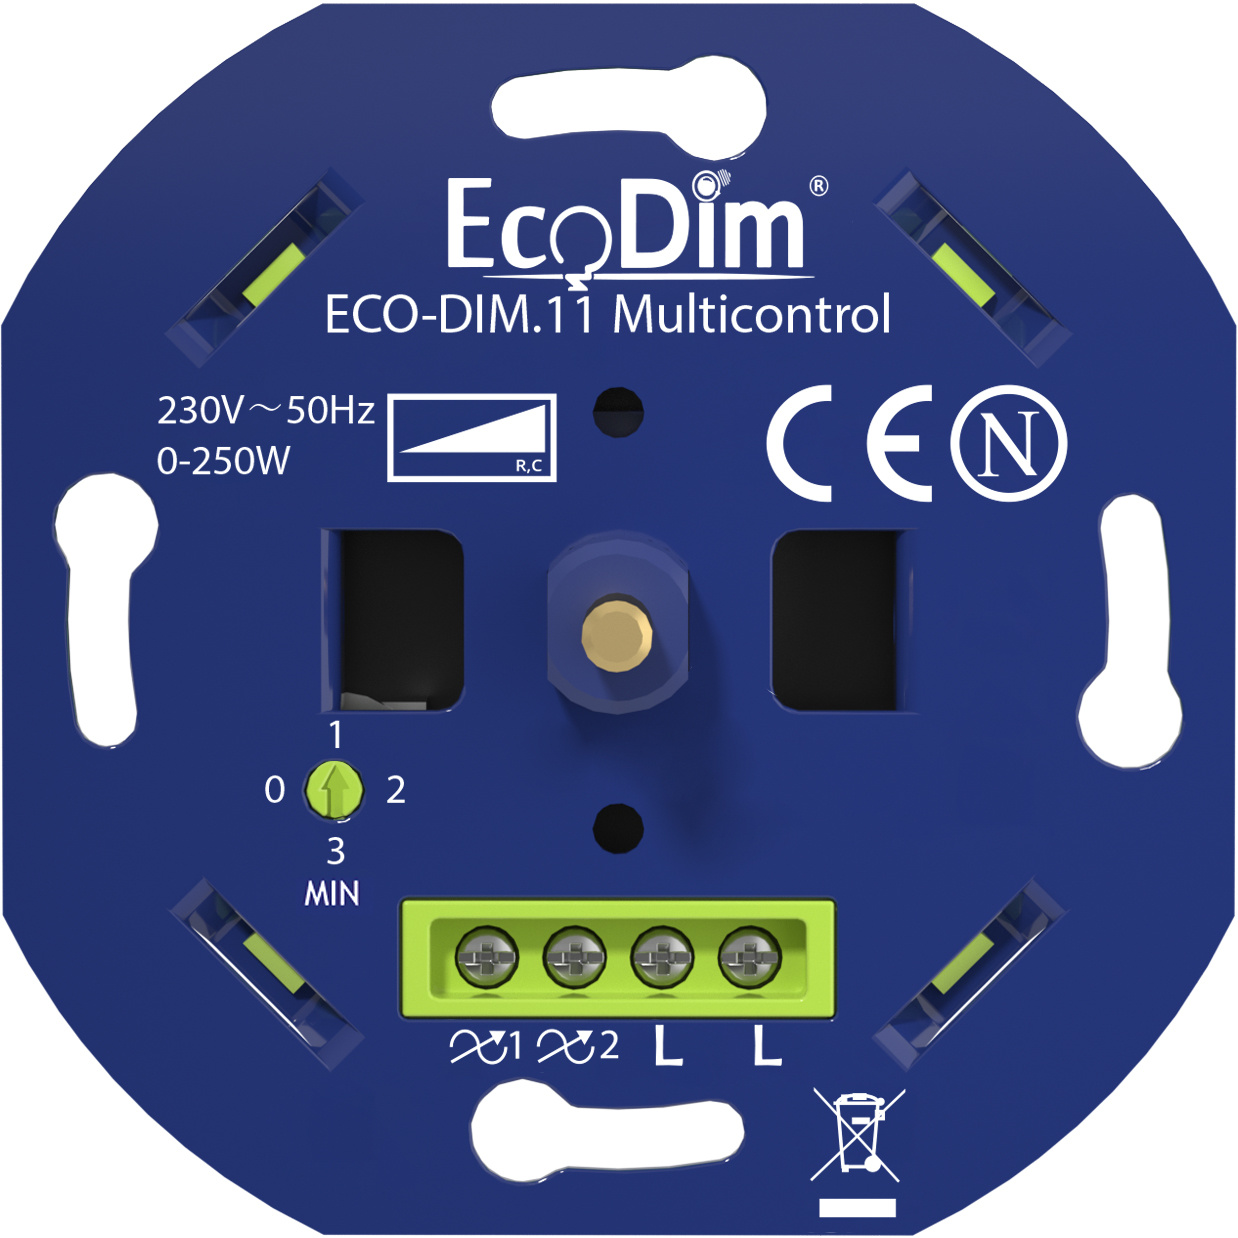 EcoDim Multicontrol led dimmer universeel 0-250W fase afsnijding (RC)